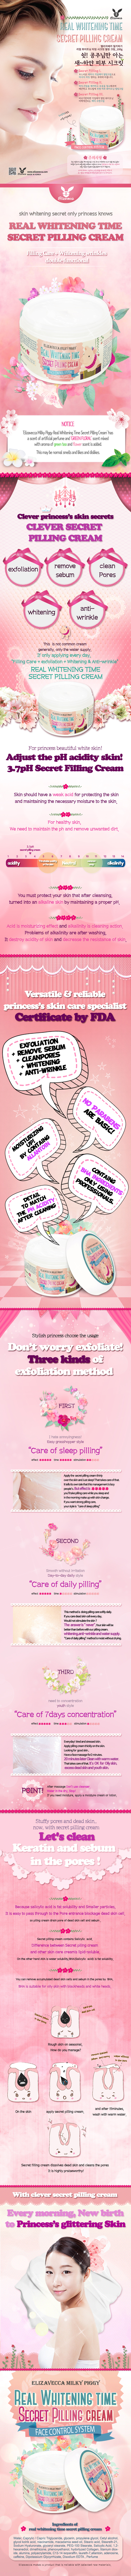 Milky Piggy Real Whitening Time Secret Pilling Cream 100g How to Use Description Ingredients